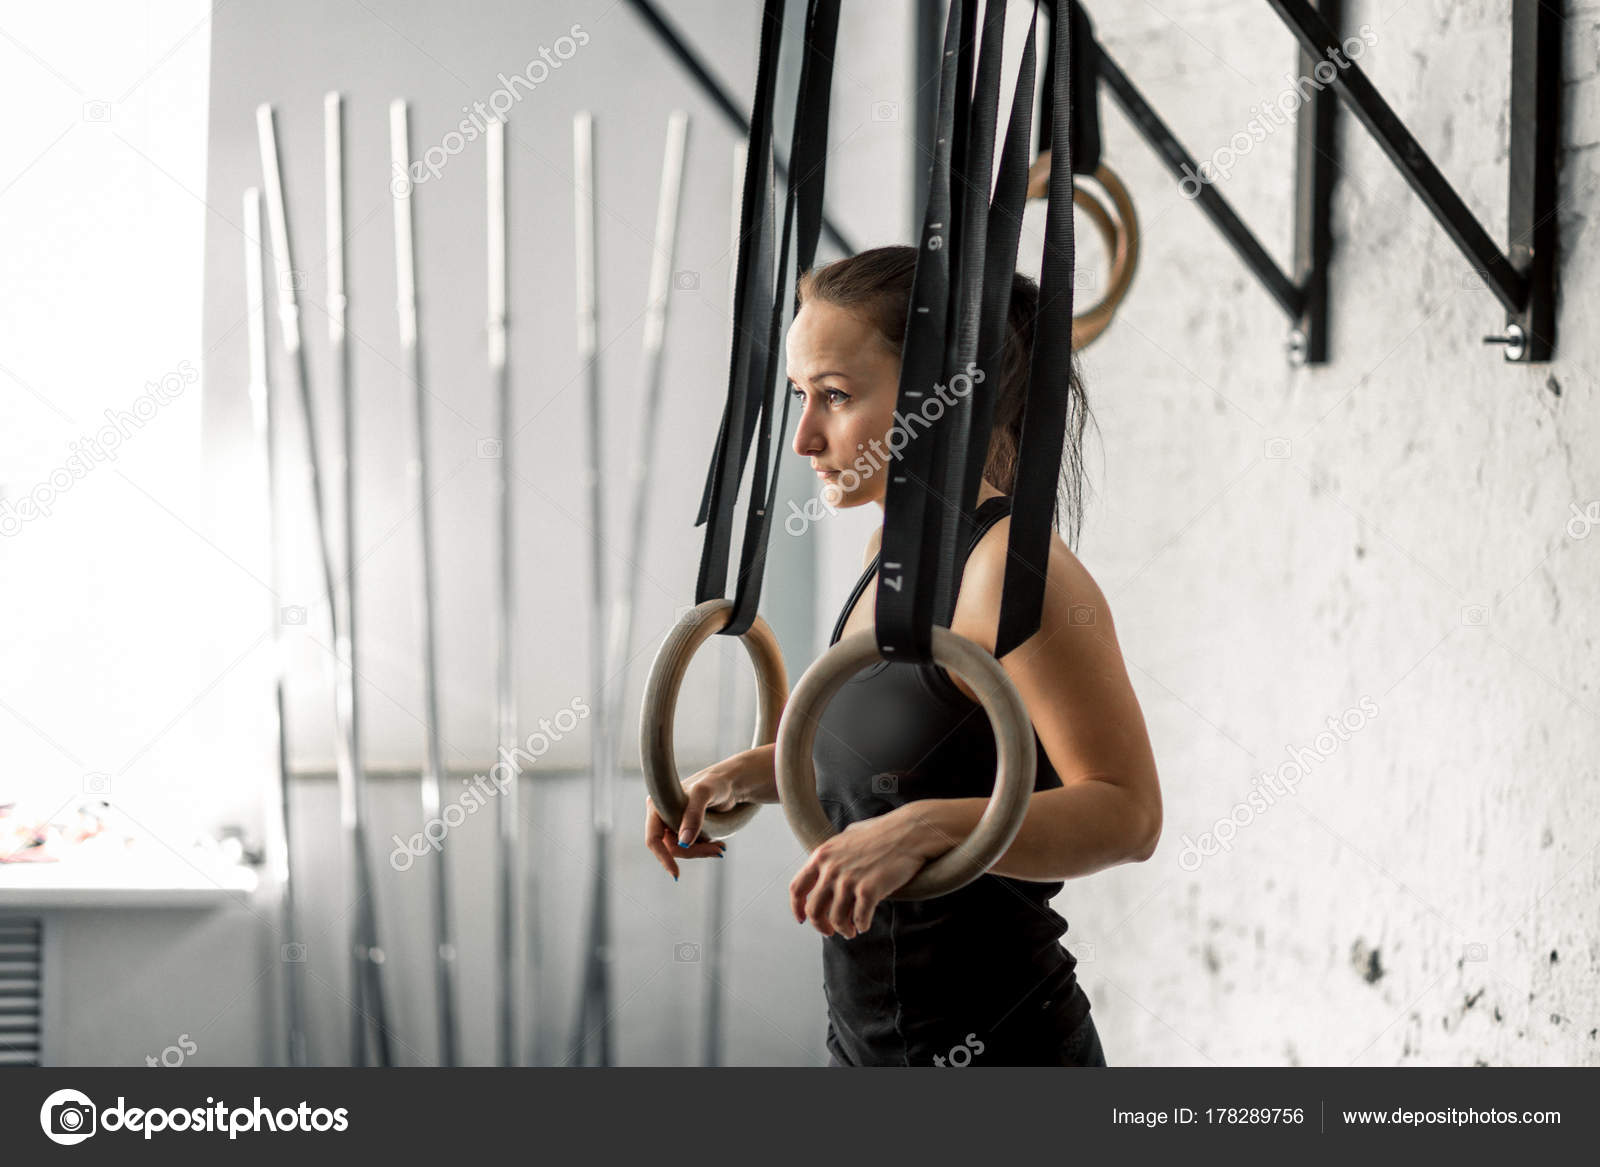 Determined woman exercising with gymnastic rings in gym stock